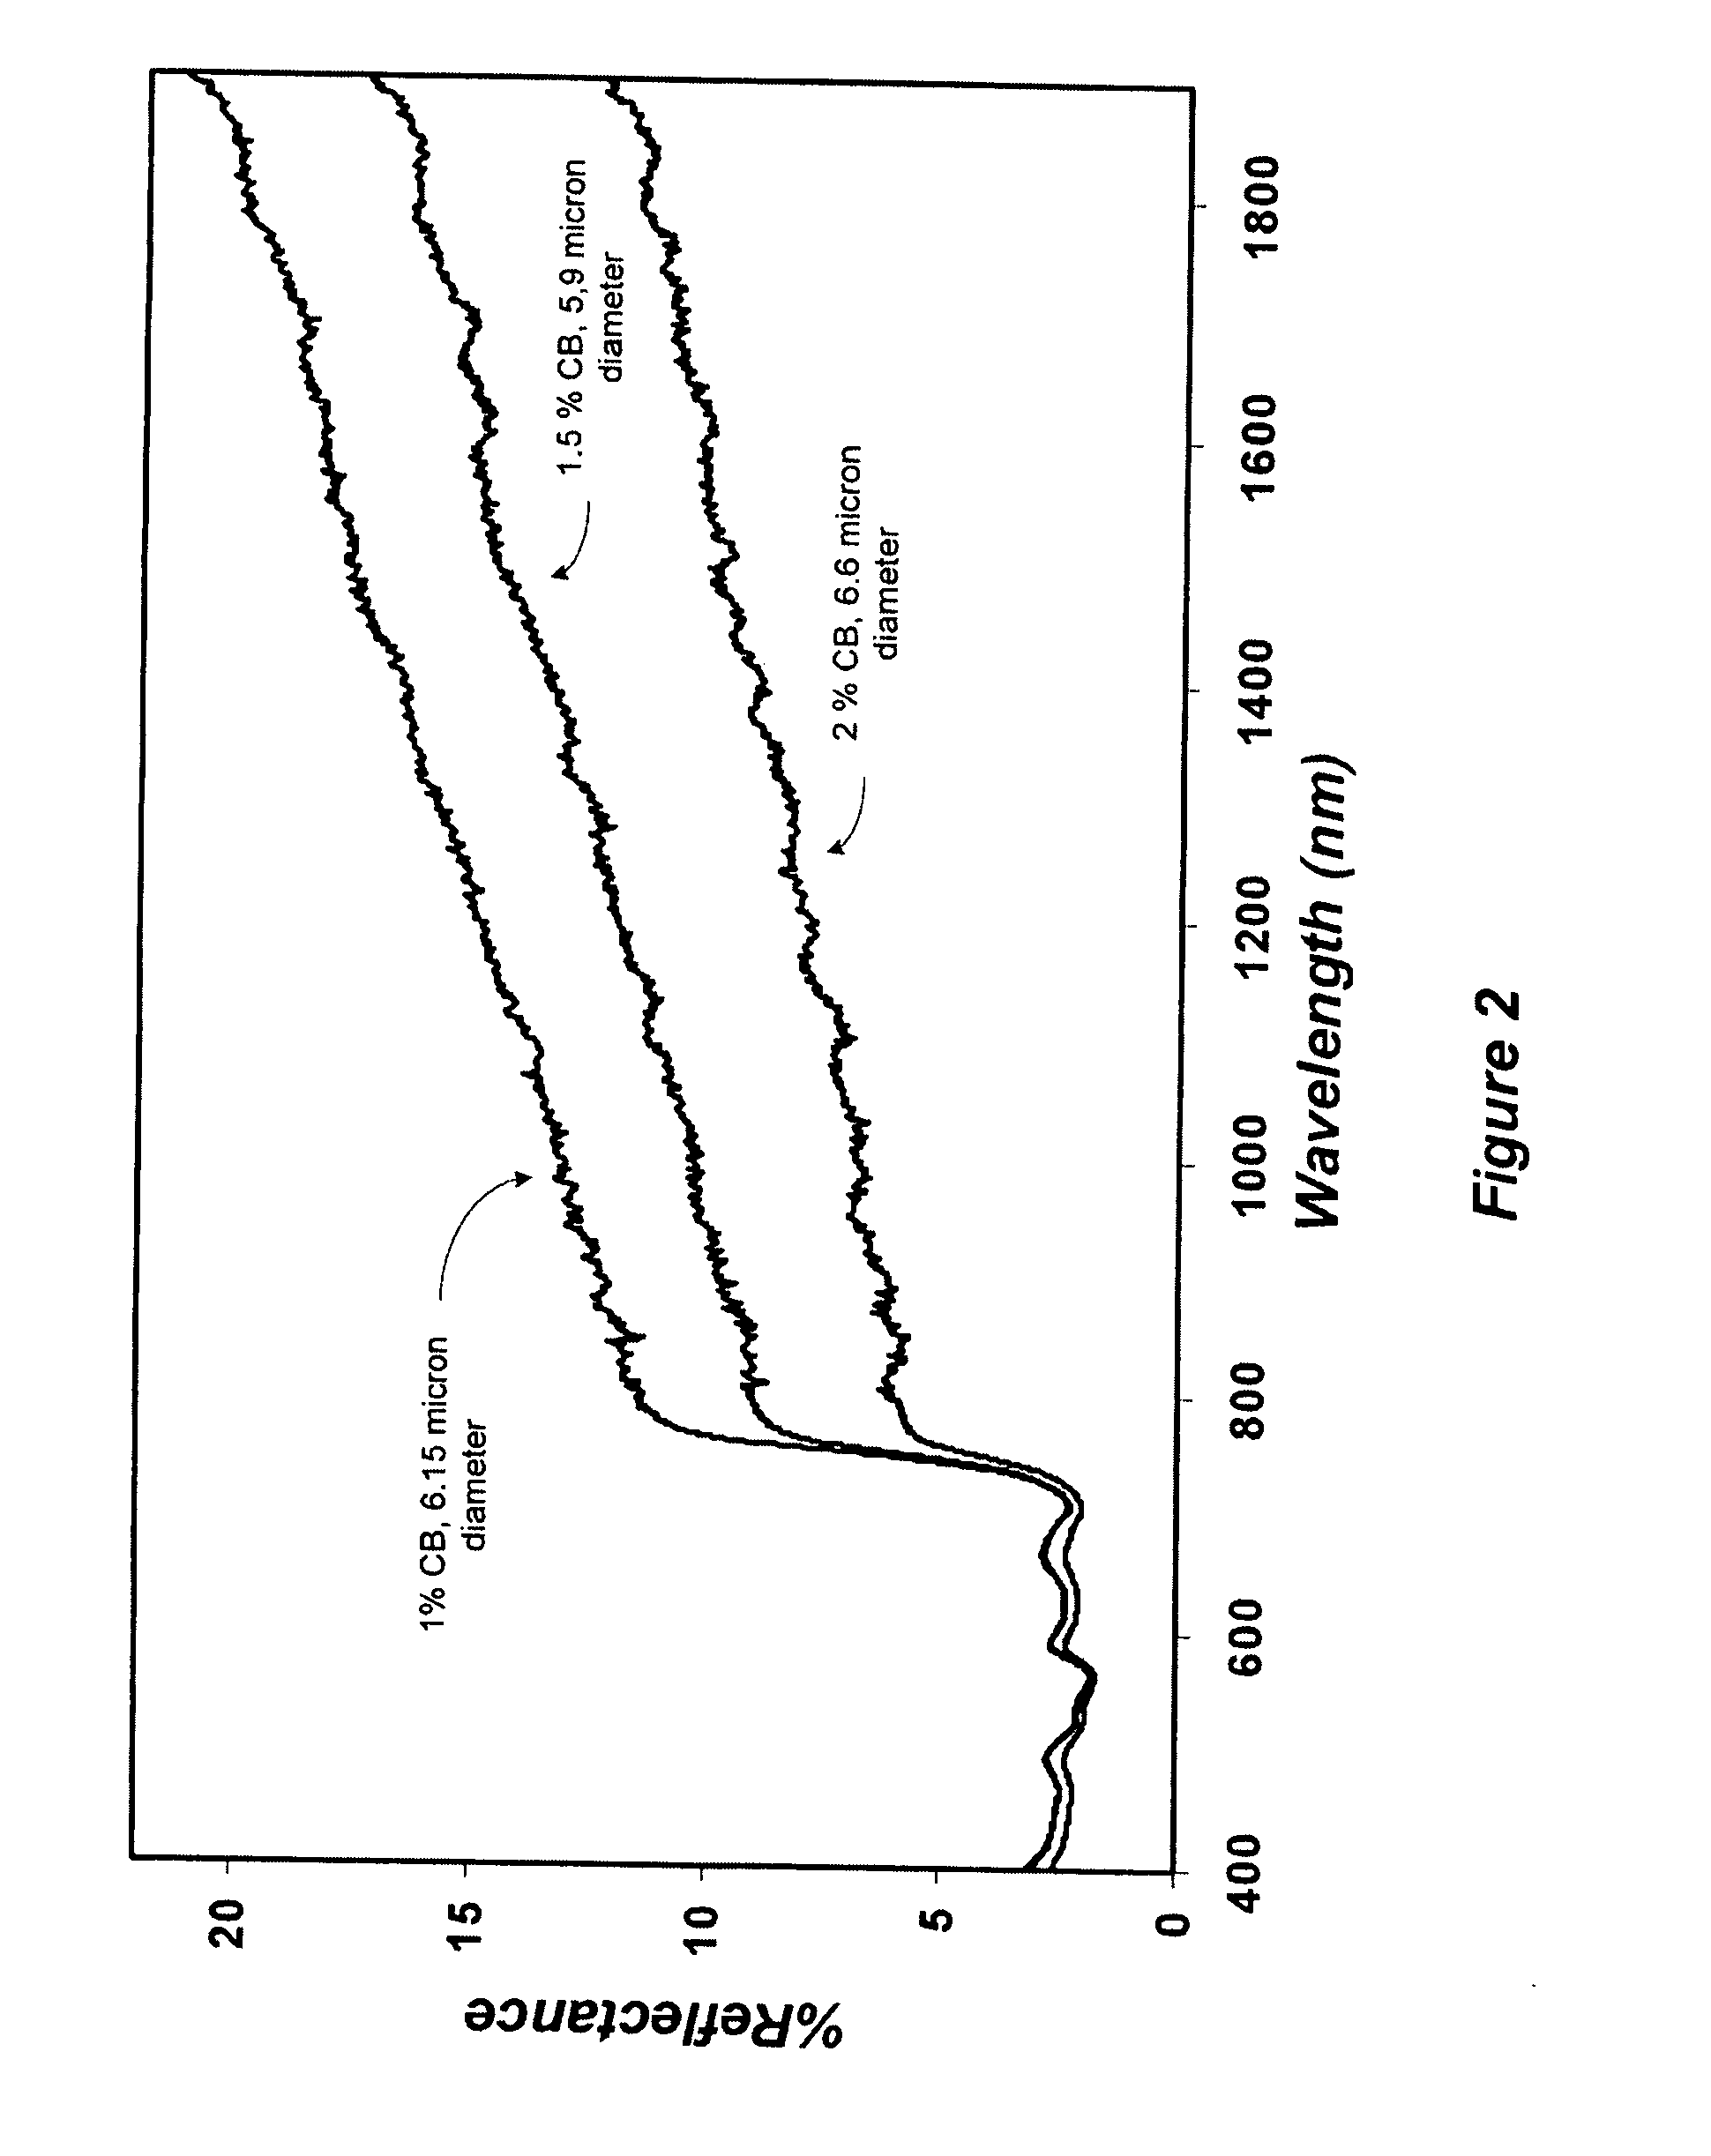 Black Toners Containing Infrared Transmissive And Reflecting Colorants